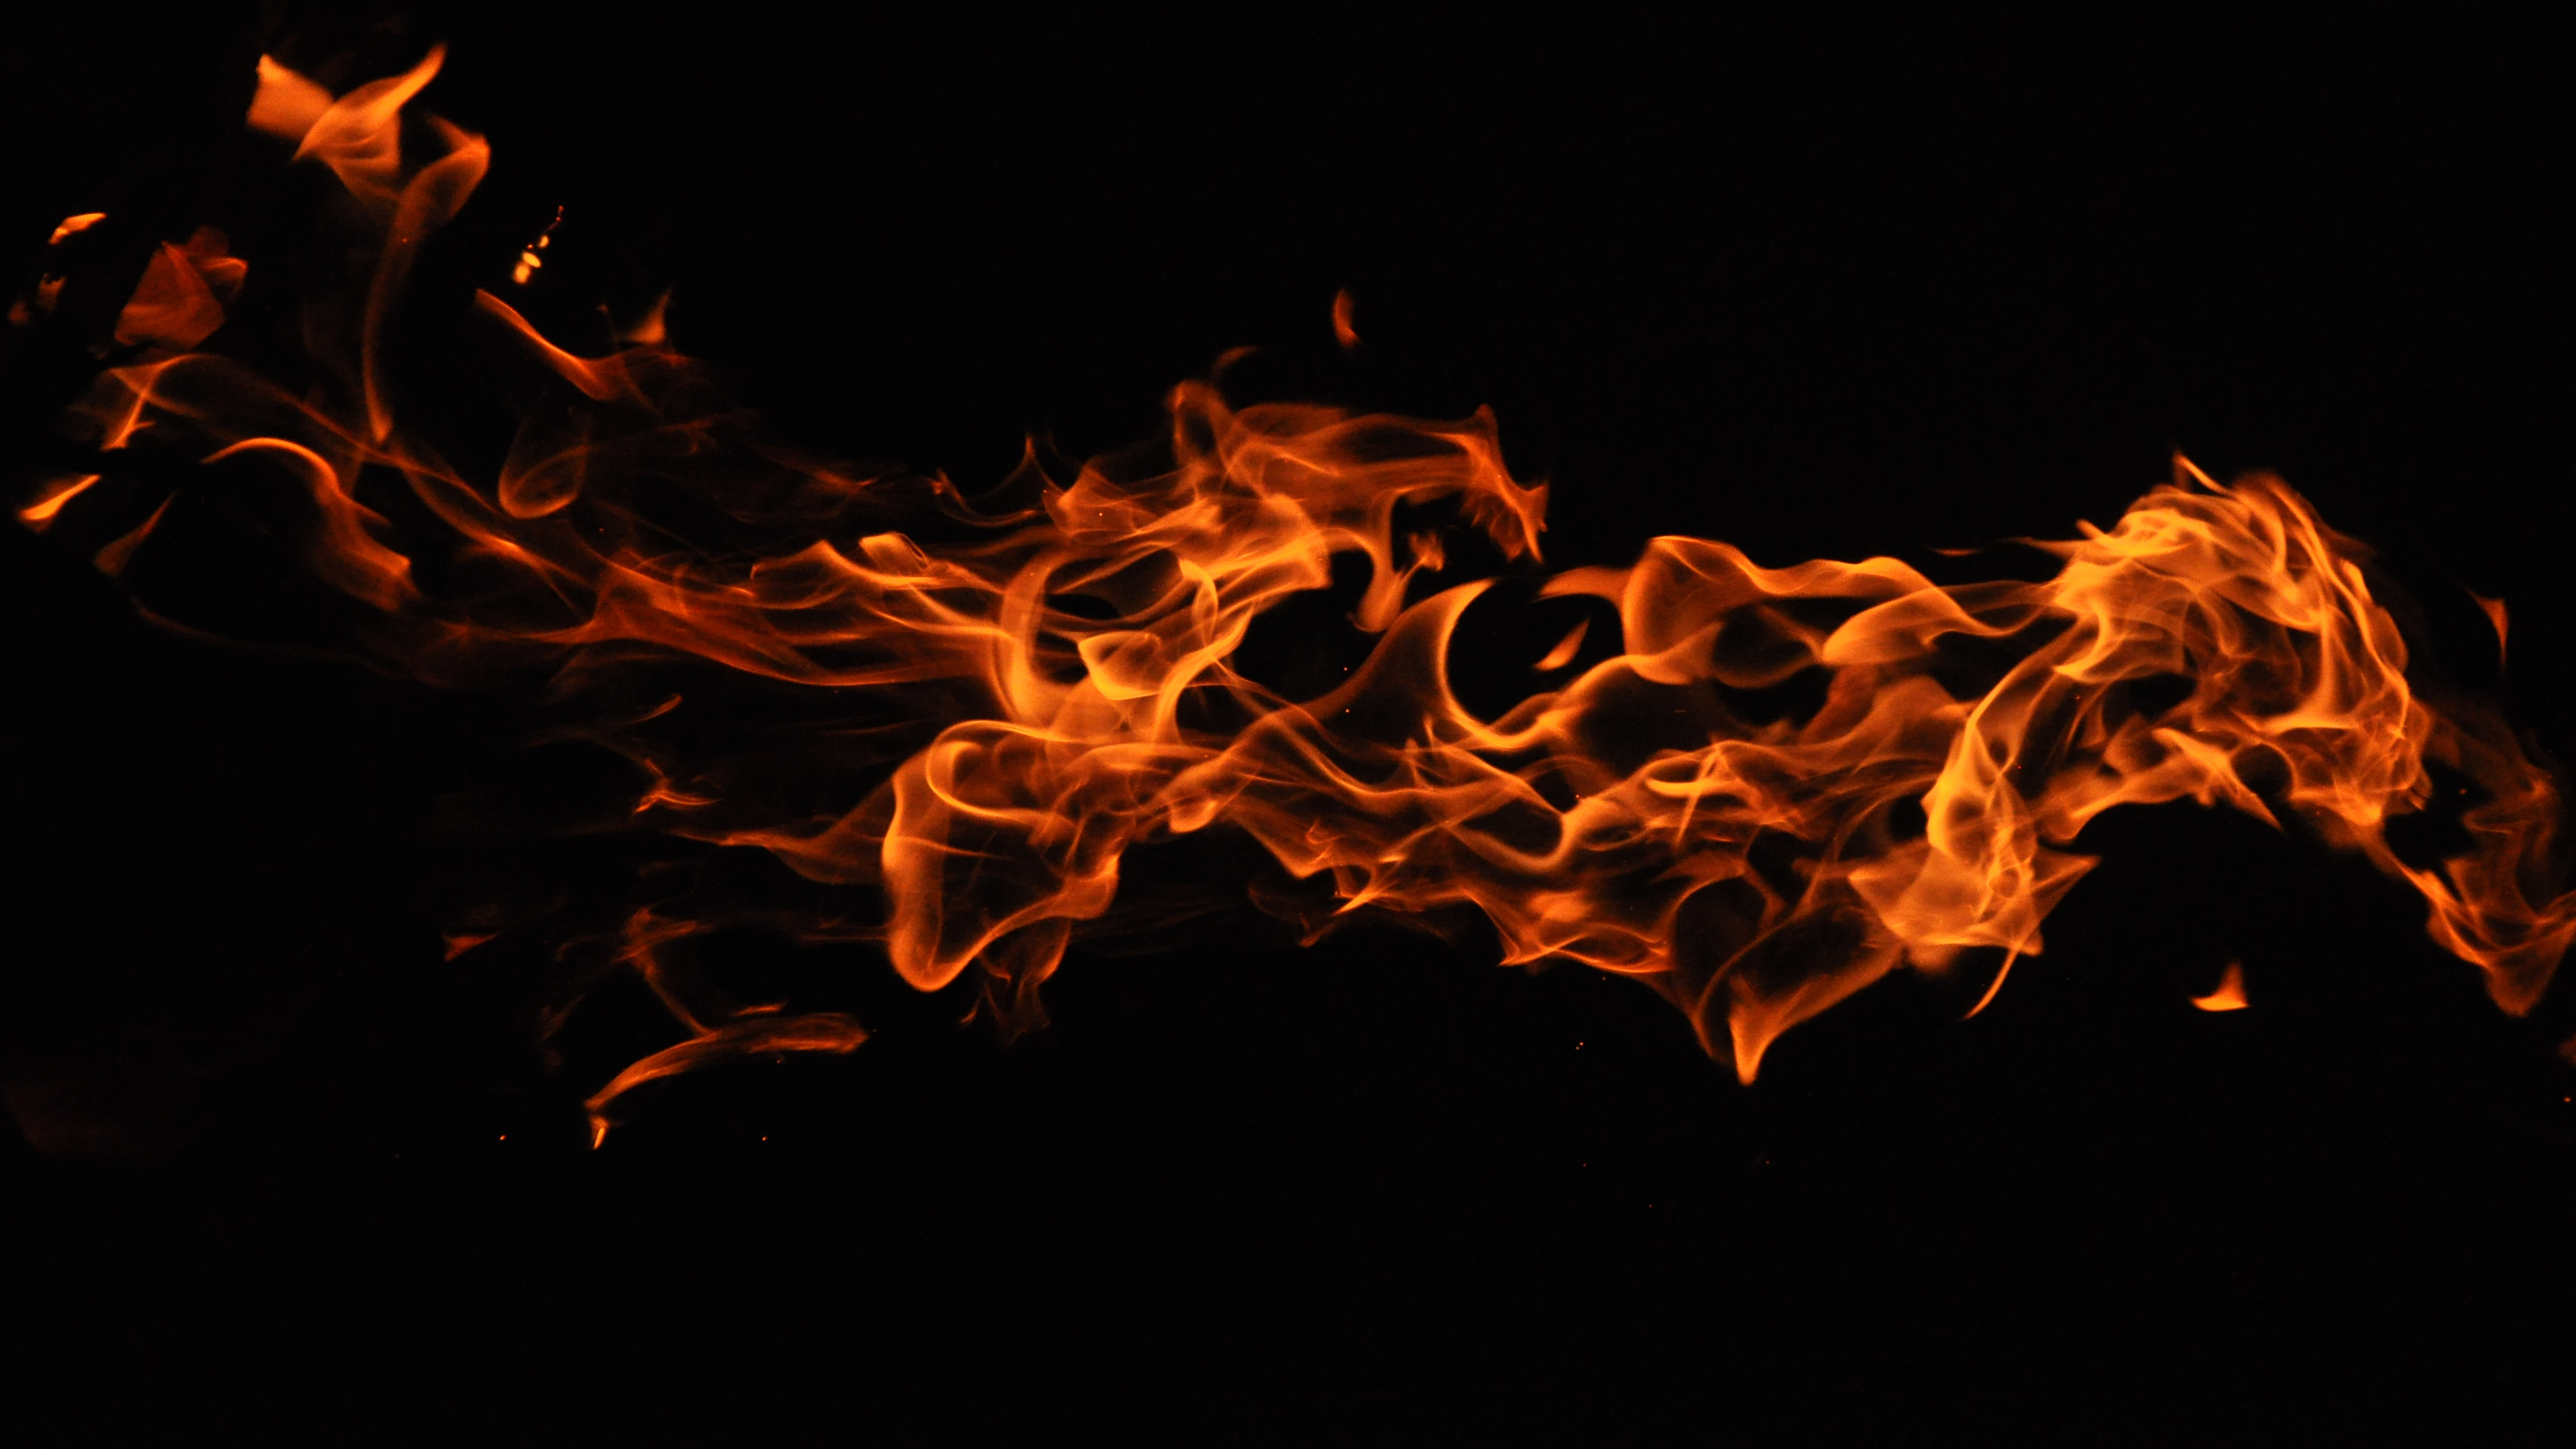 Fire in Black Background With Black Background. Wallpaper in 3840x2160 Resolution